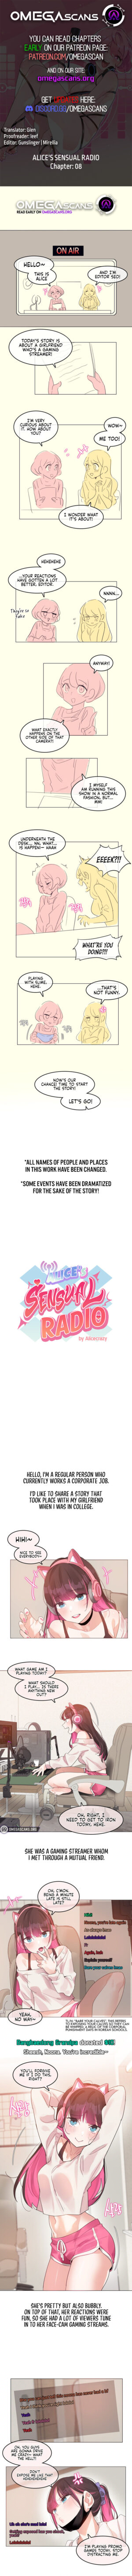 [Alice] Alice's Sensual Radio (1-13) [English] [Omega Scans] [Ongoing]